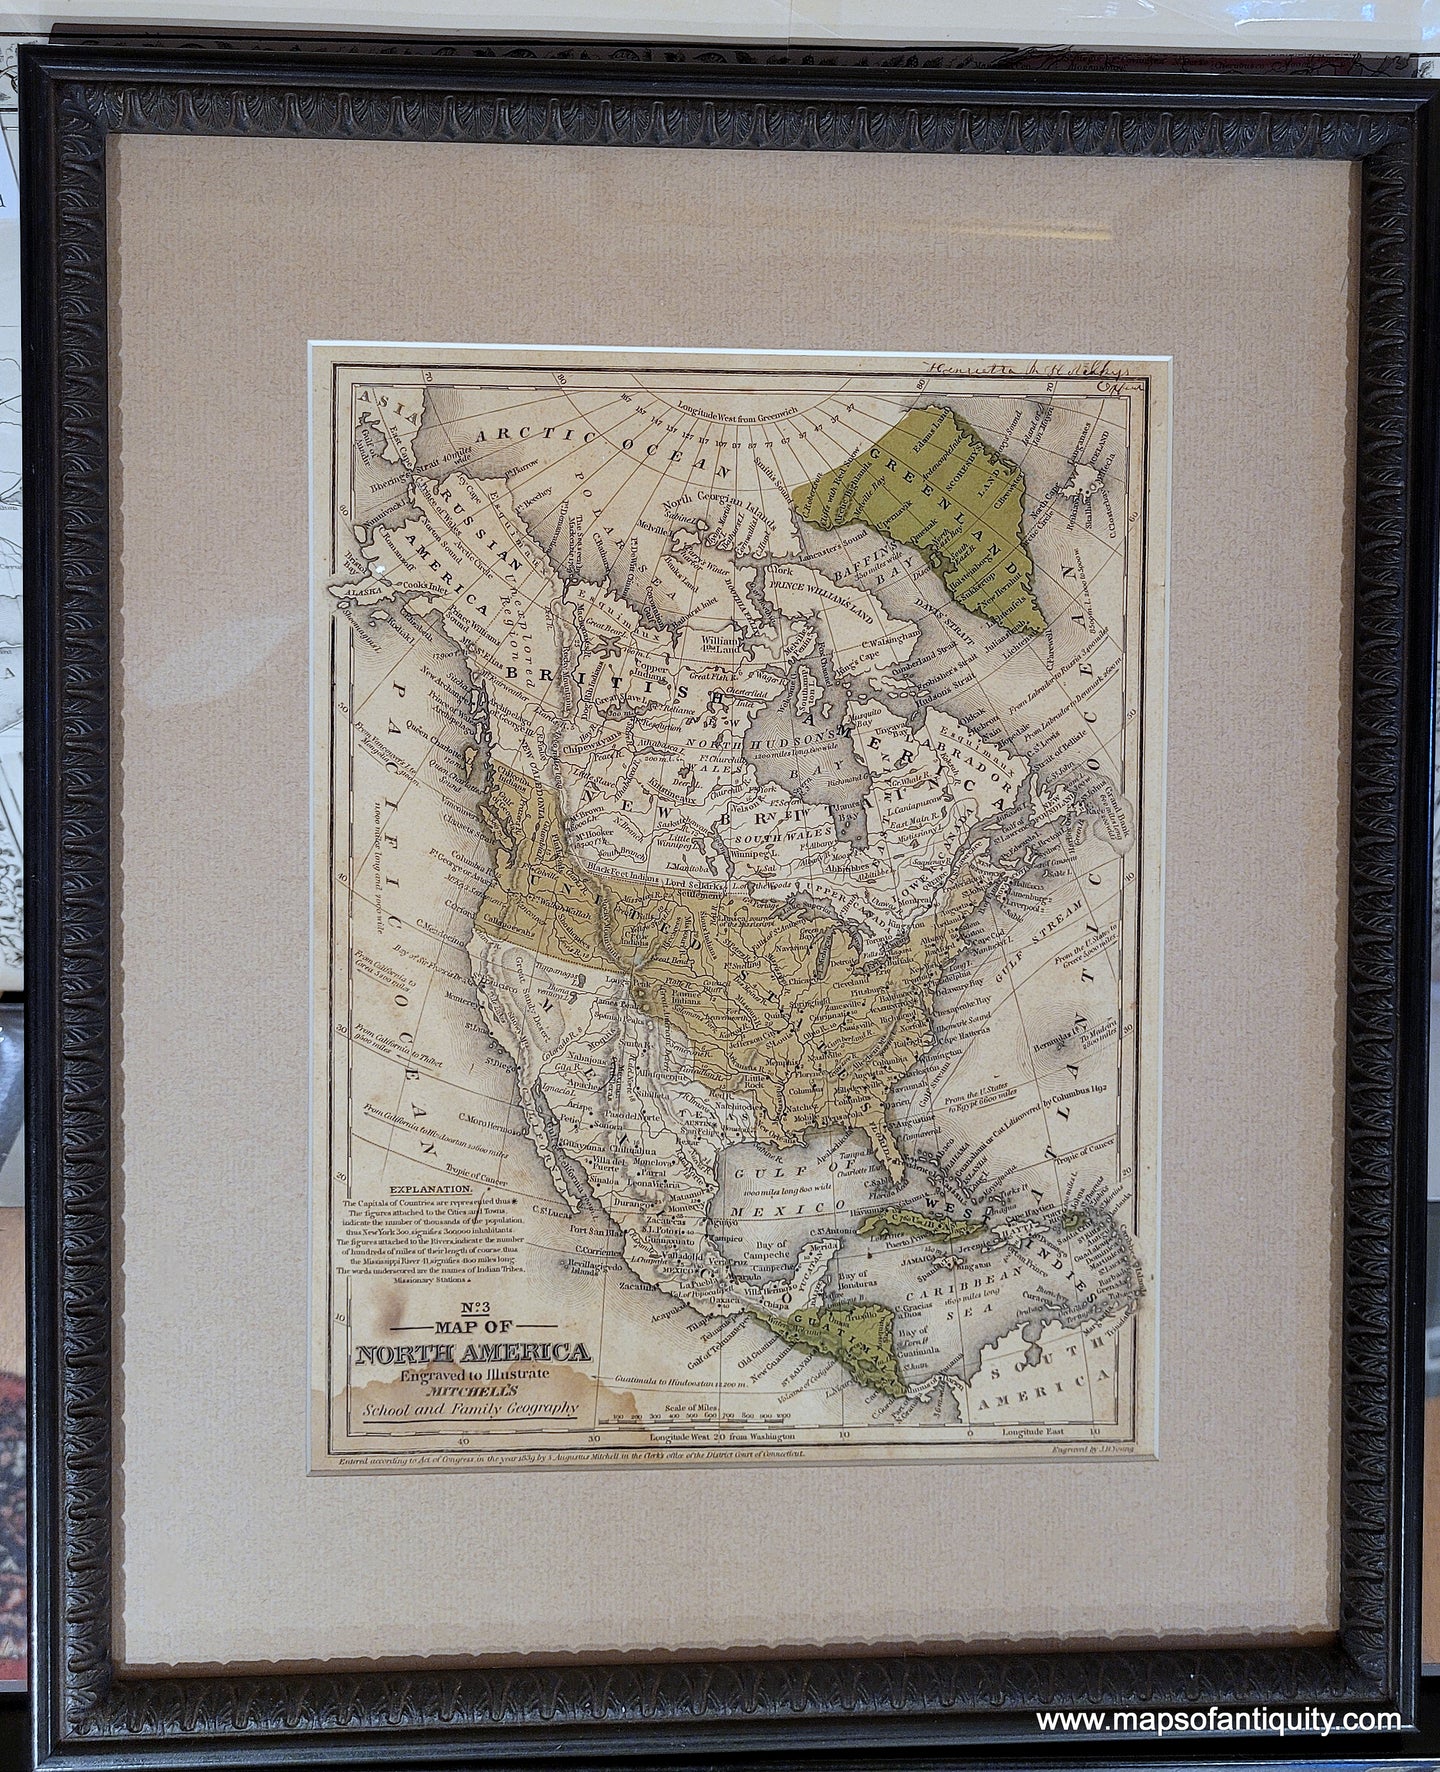 Antique-Hand-Colored-Map-No.-3-Map-of-North-America-North-America-North-America-General-1839-Mitchell-Maps-Of-Antiquity